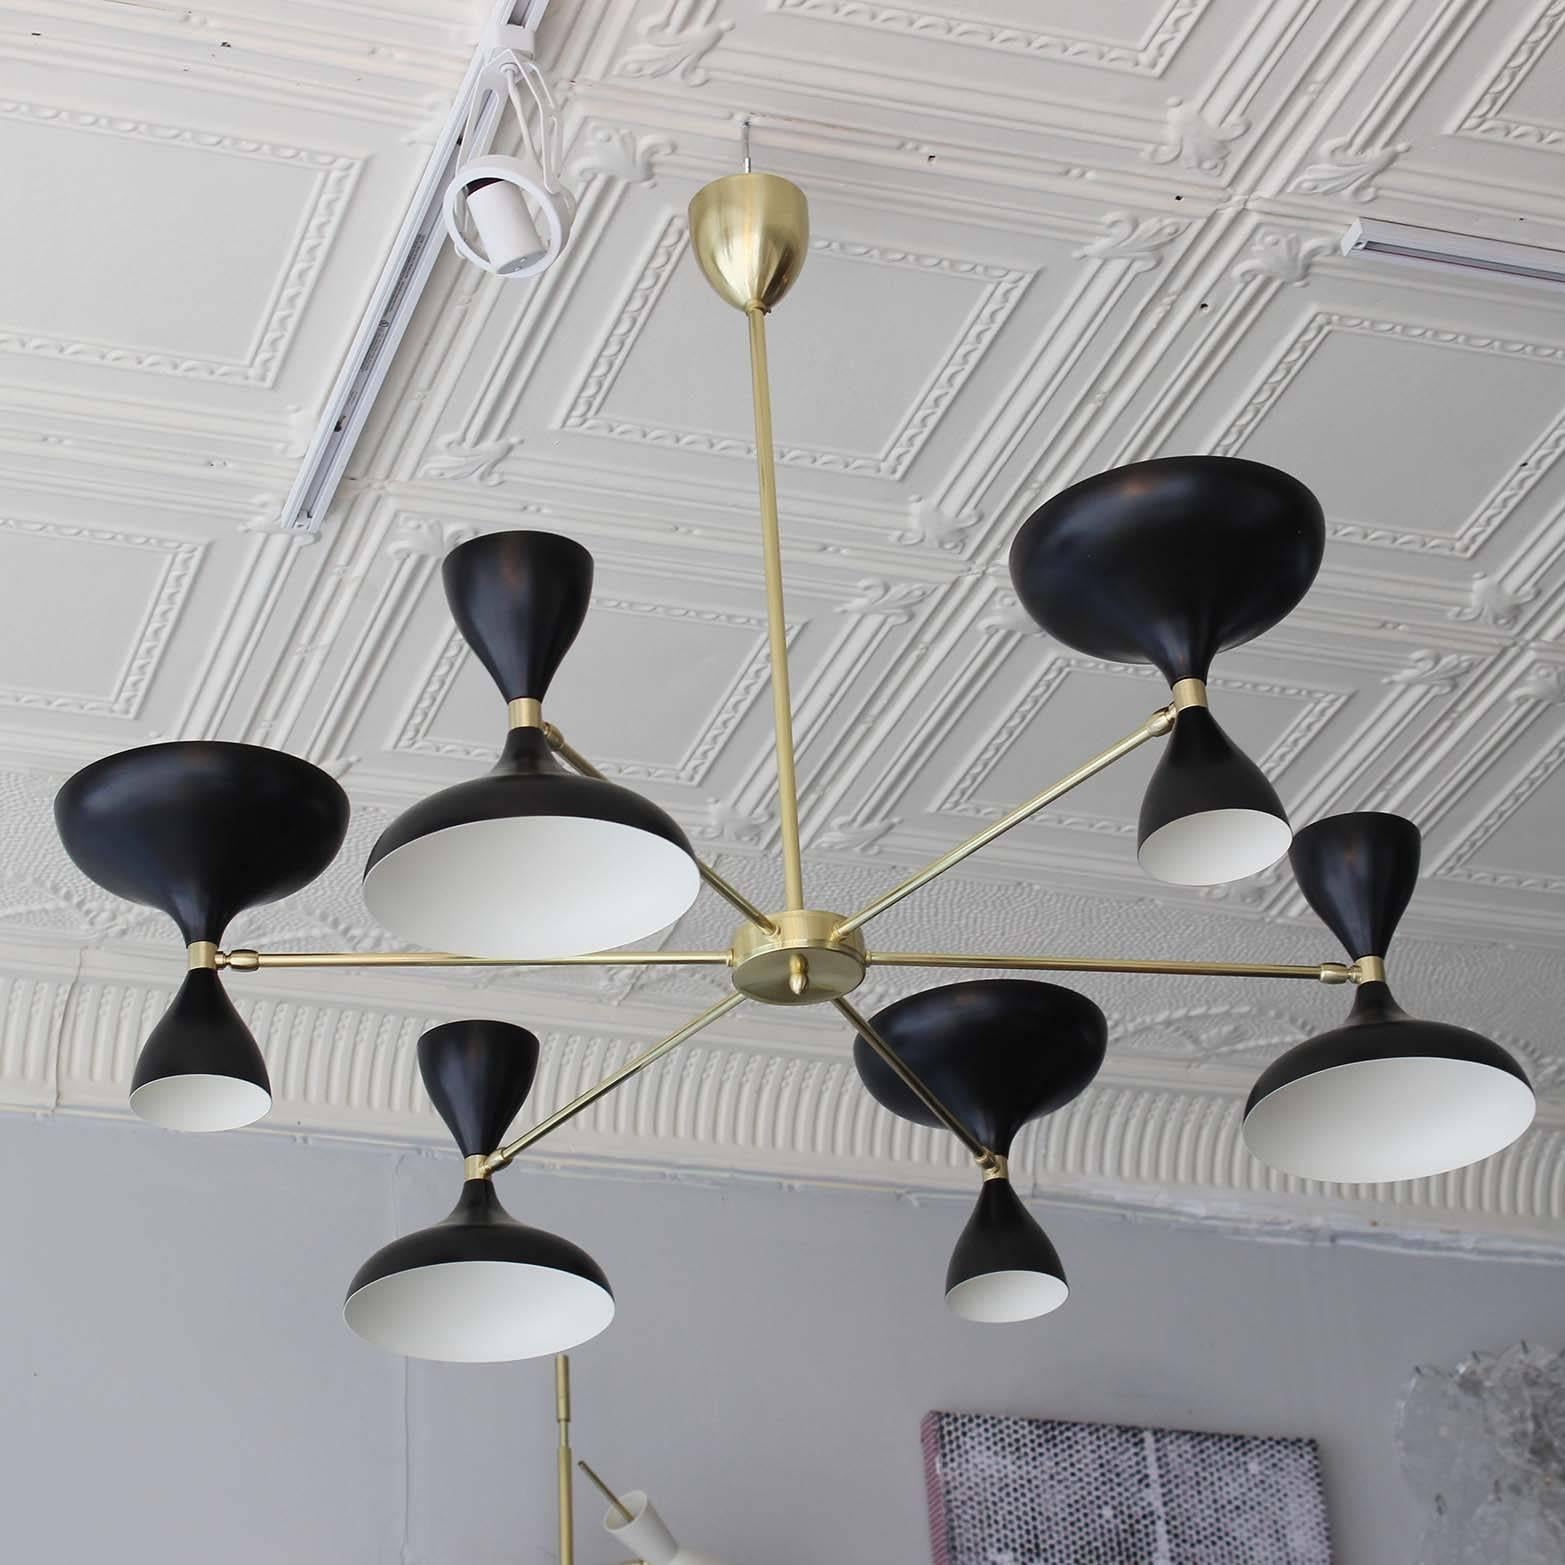 Our own exclusive sunburst design Milano chandelier, with six brass arms and pivoting powdercoated heads with up and down sockets. In black or white or both. All made in Italy.

12 shade chandelier and sconces also available.

